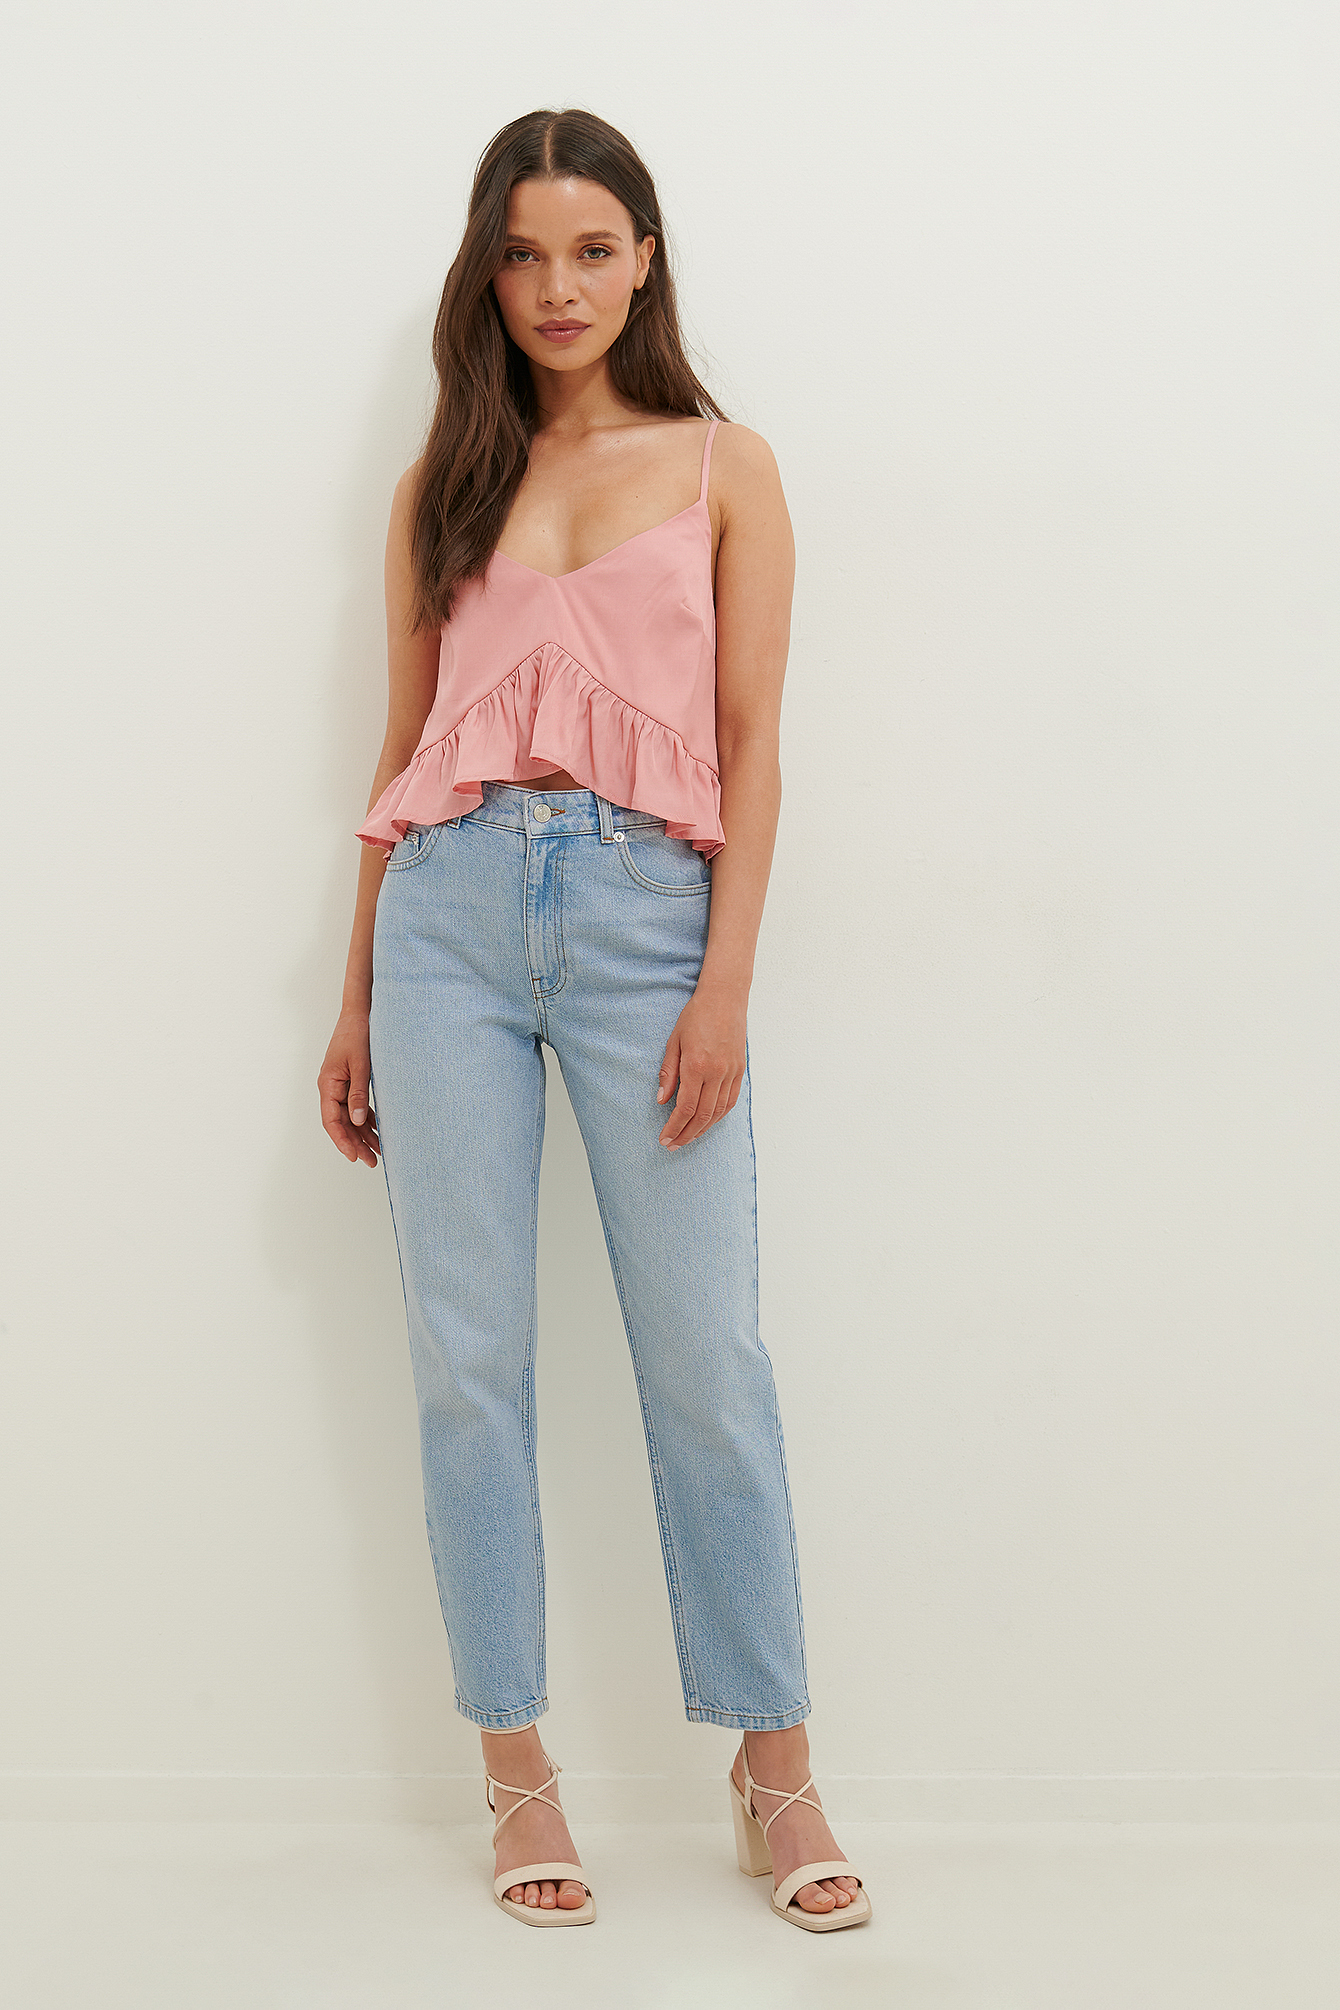 Cropped Frill Top Outfit.